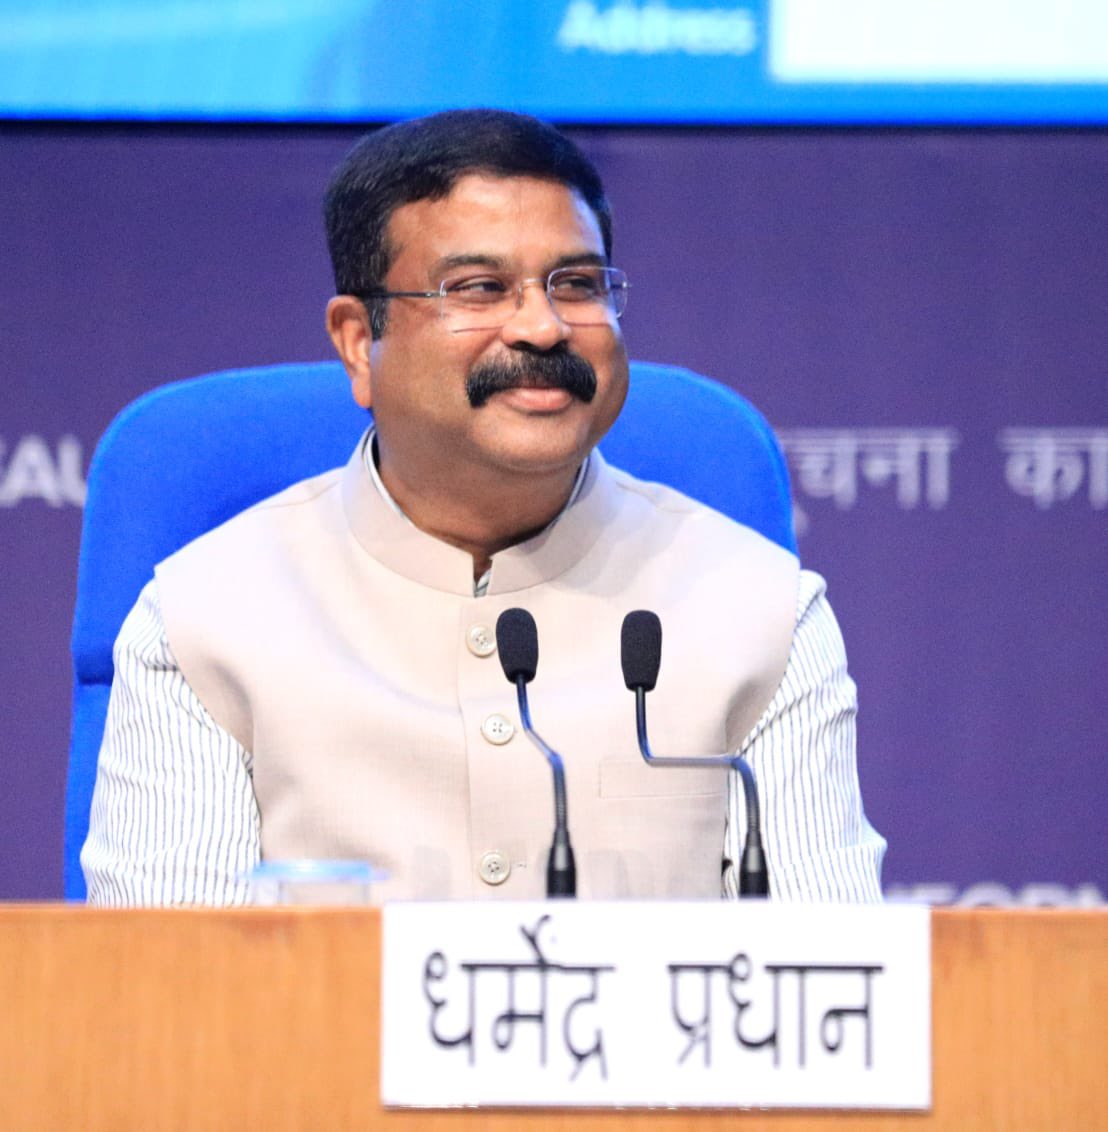 Today, Hon’ble Education Minister Shri @dpradhanbjp along with Hon'ble MoS for @MIB_India Shri @Murugan_MoS announced the “Kashi Tamil Sangamam” to be held in Varanasi (Kashi) from 16th Nov to 19th Dec 2022. He also launched the website for registering for “Kashi Tamil Sangamam”.